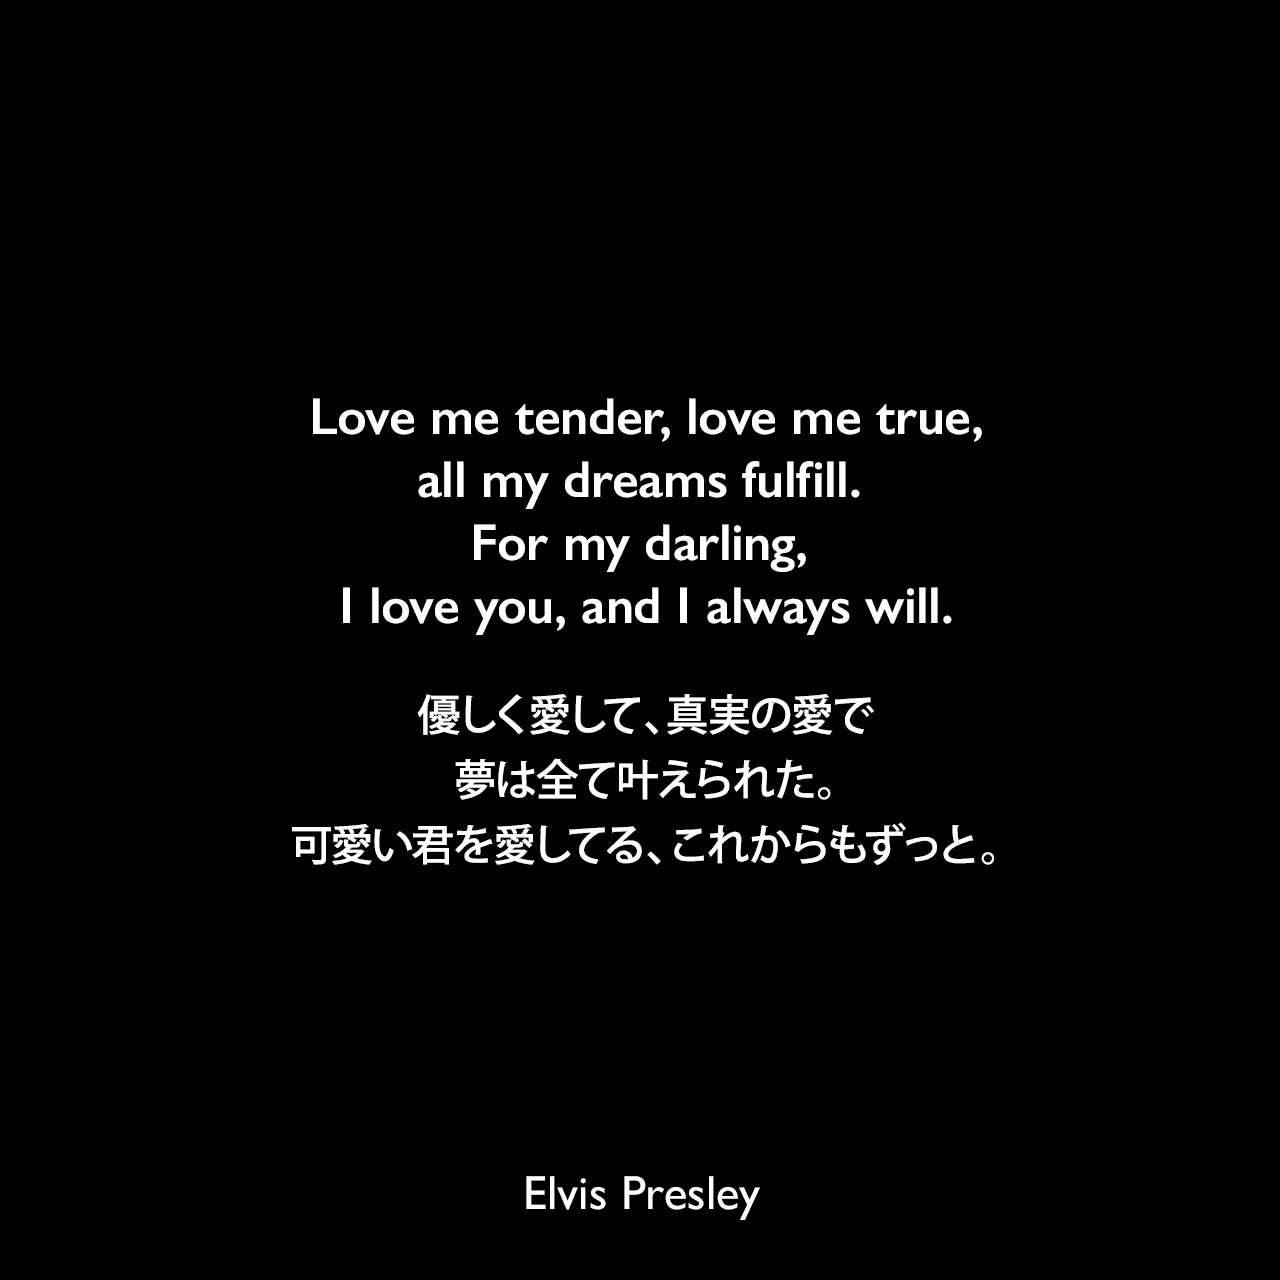 Love me tender, love me true, all my dreams fulfill. For my darling, I love you, and I always will.優しく愛して、真実の愛で、夢は全て叶えられた。可愛い君を愛してる、これからもずっと。- プレスリーの曲「Love Me Tender」よりElvis Presley